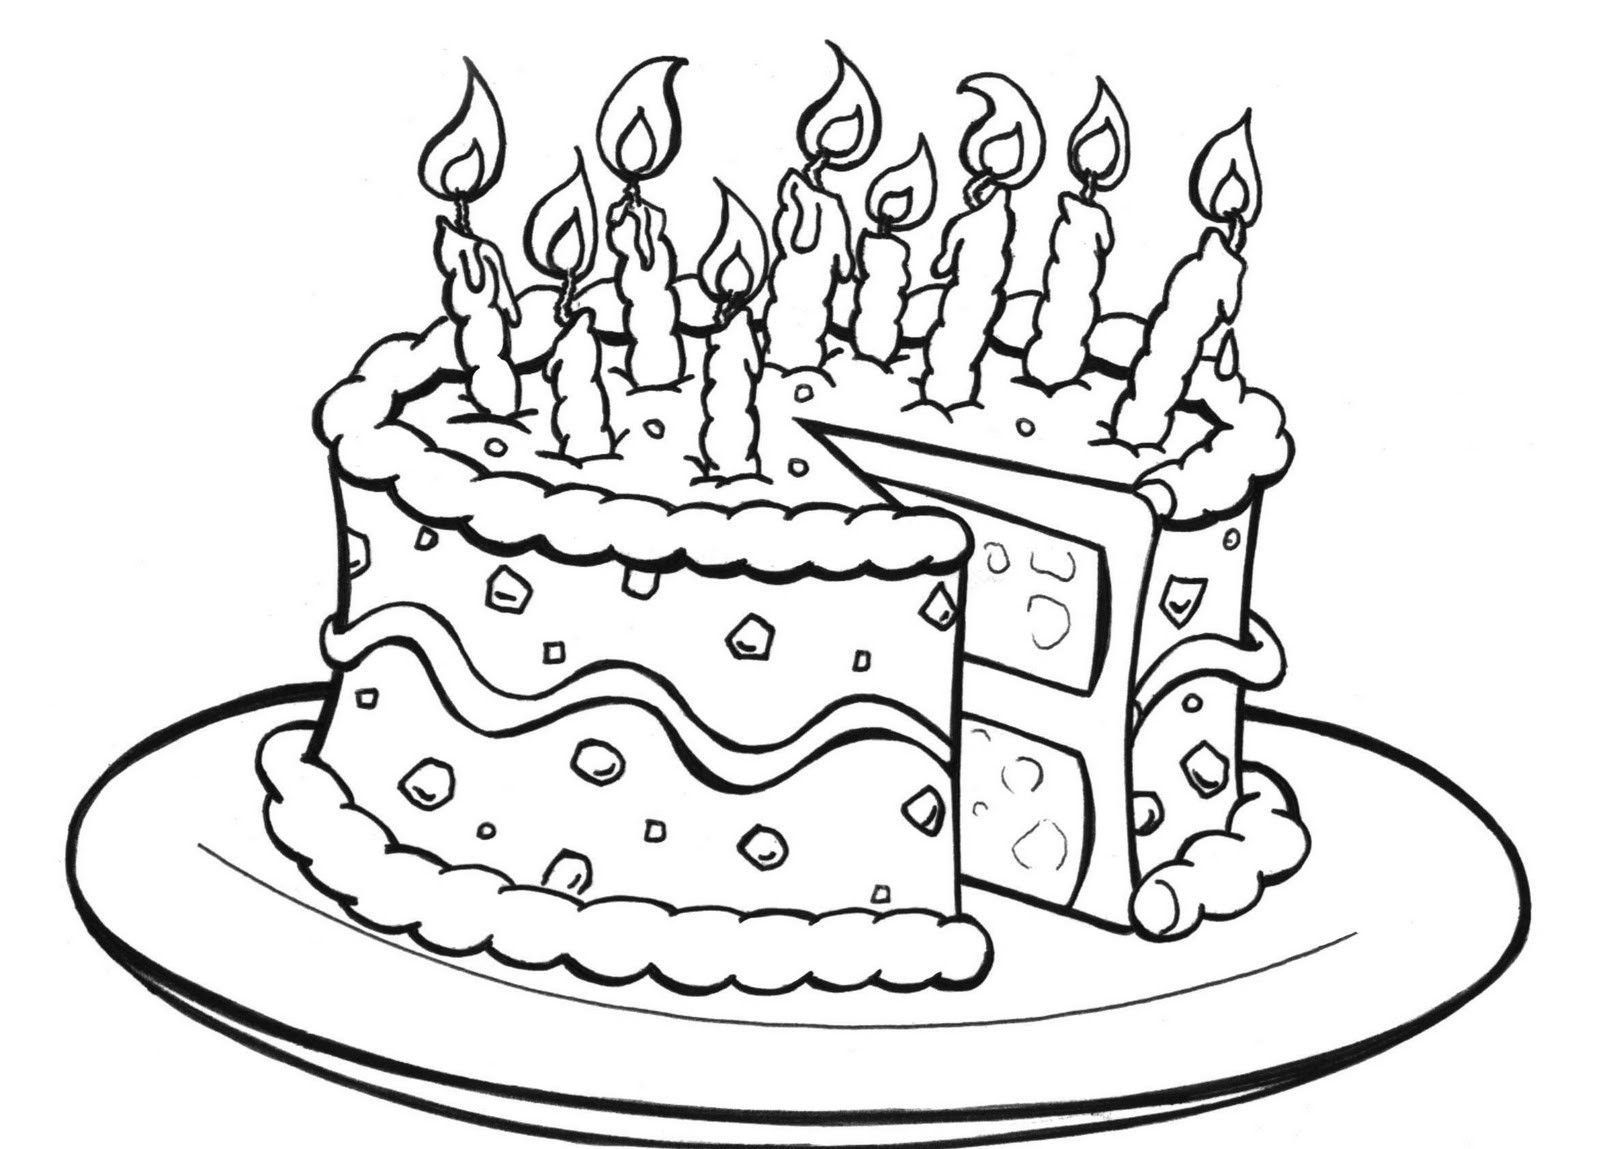 Cool Birthday Cake With Slice Coloring Page